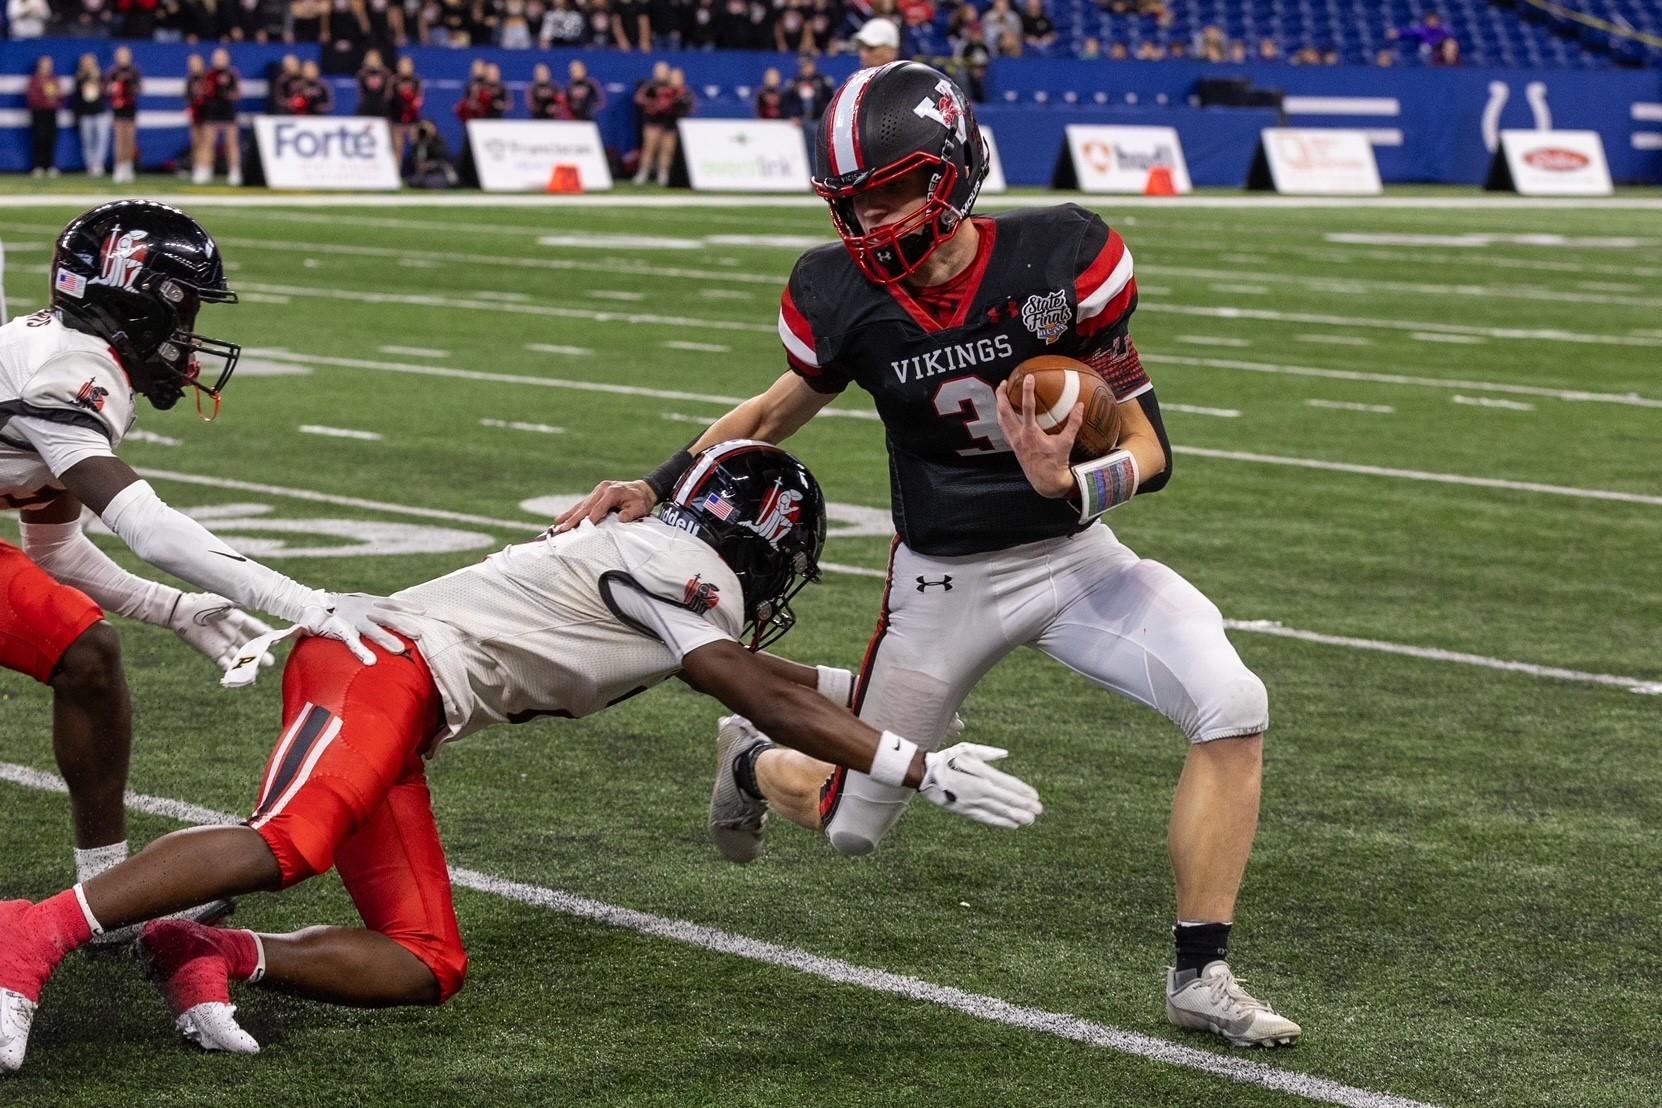 Luers rolls to first state championship since 2012